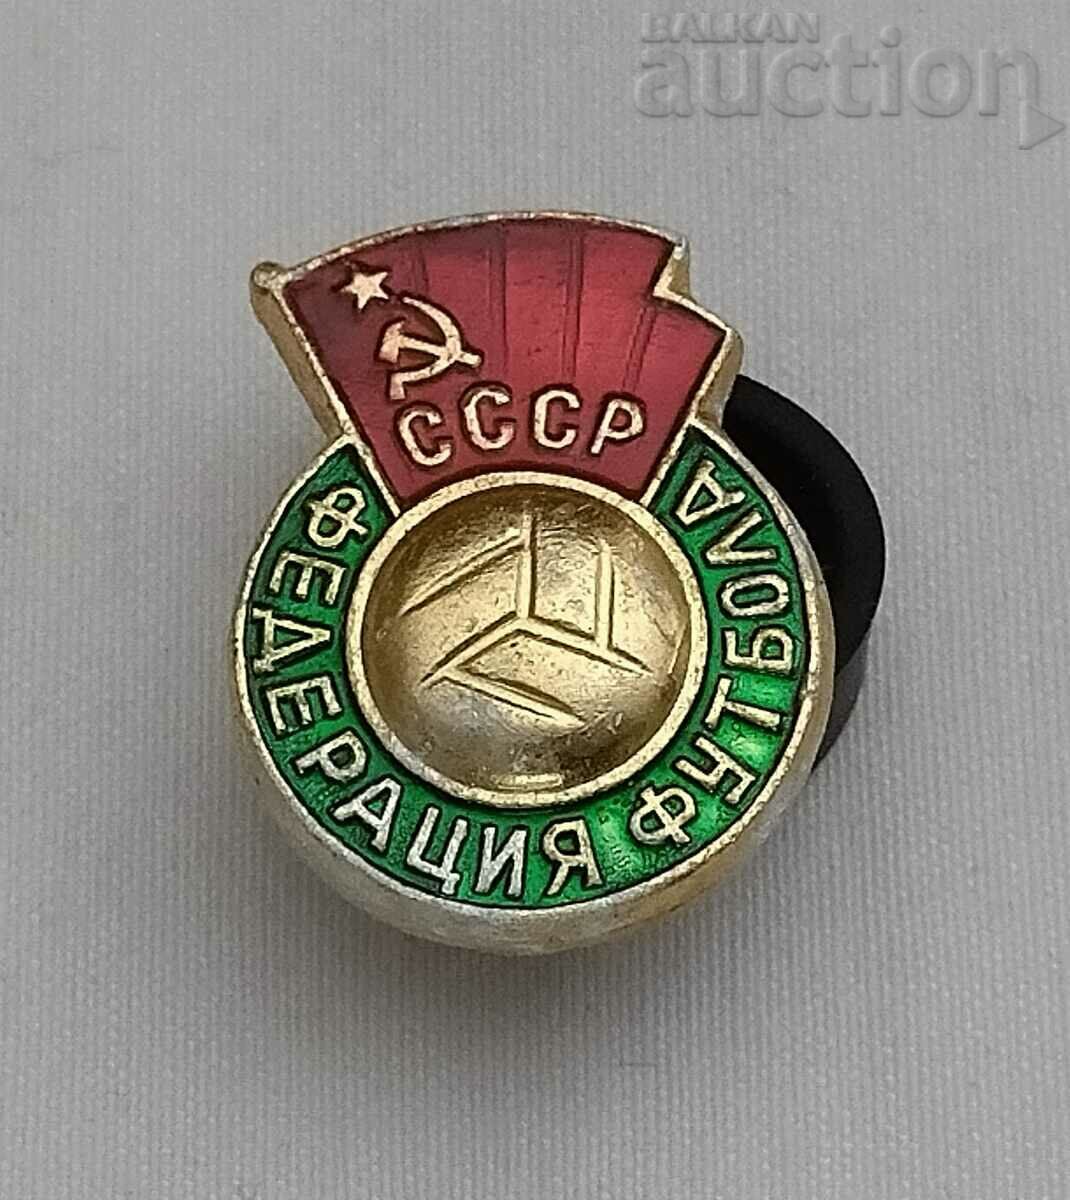 FOOTBALL FEDERATION OF THE USSR BADGE